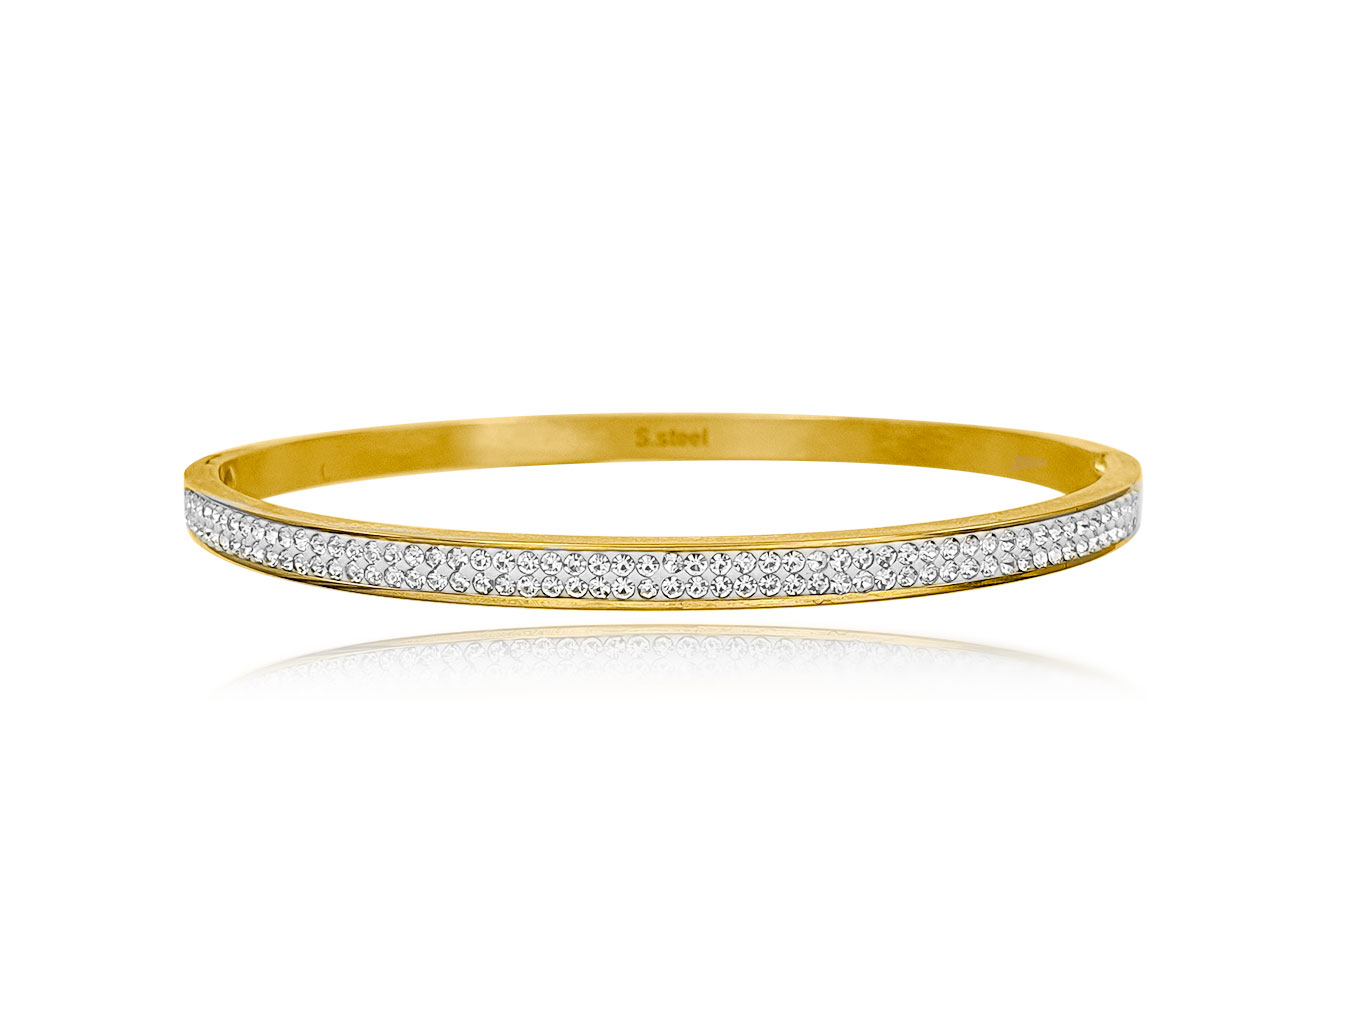 Sparkling Thin Bracelet Gold Plated - Adema